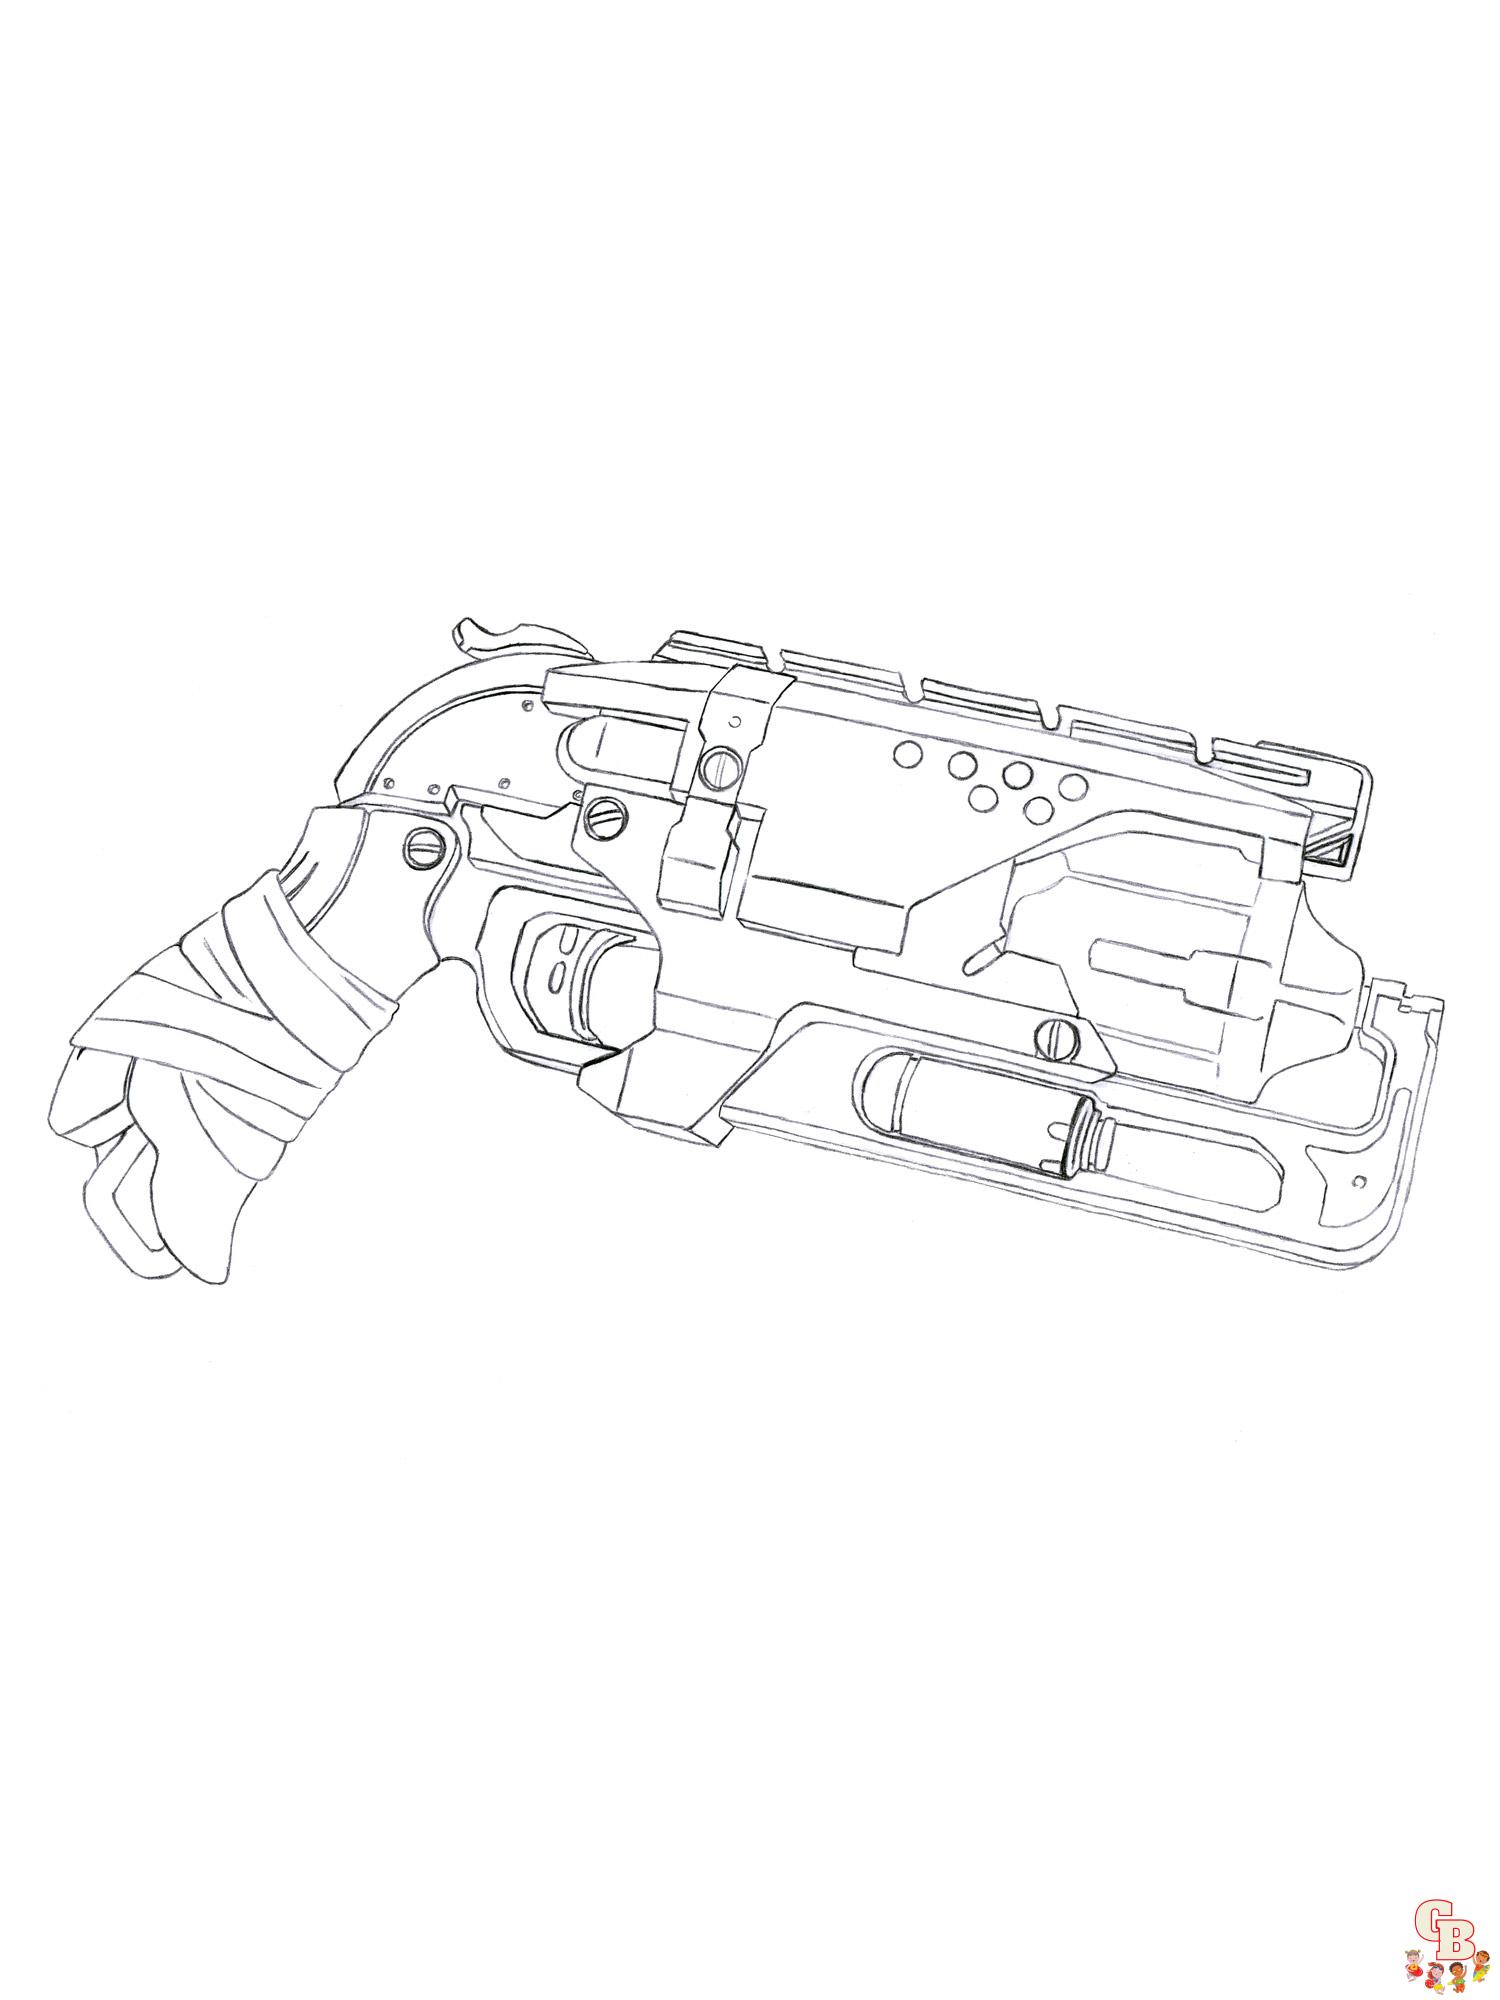 Nerf gun coloring pages free printable and easy to color